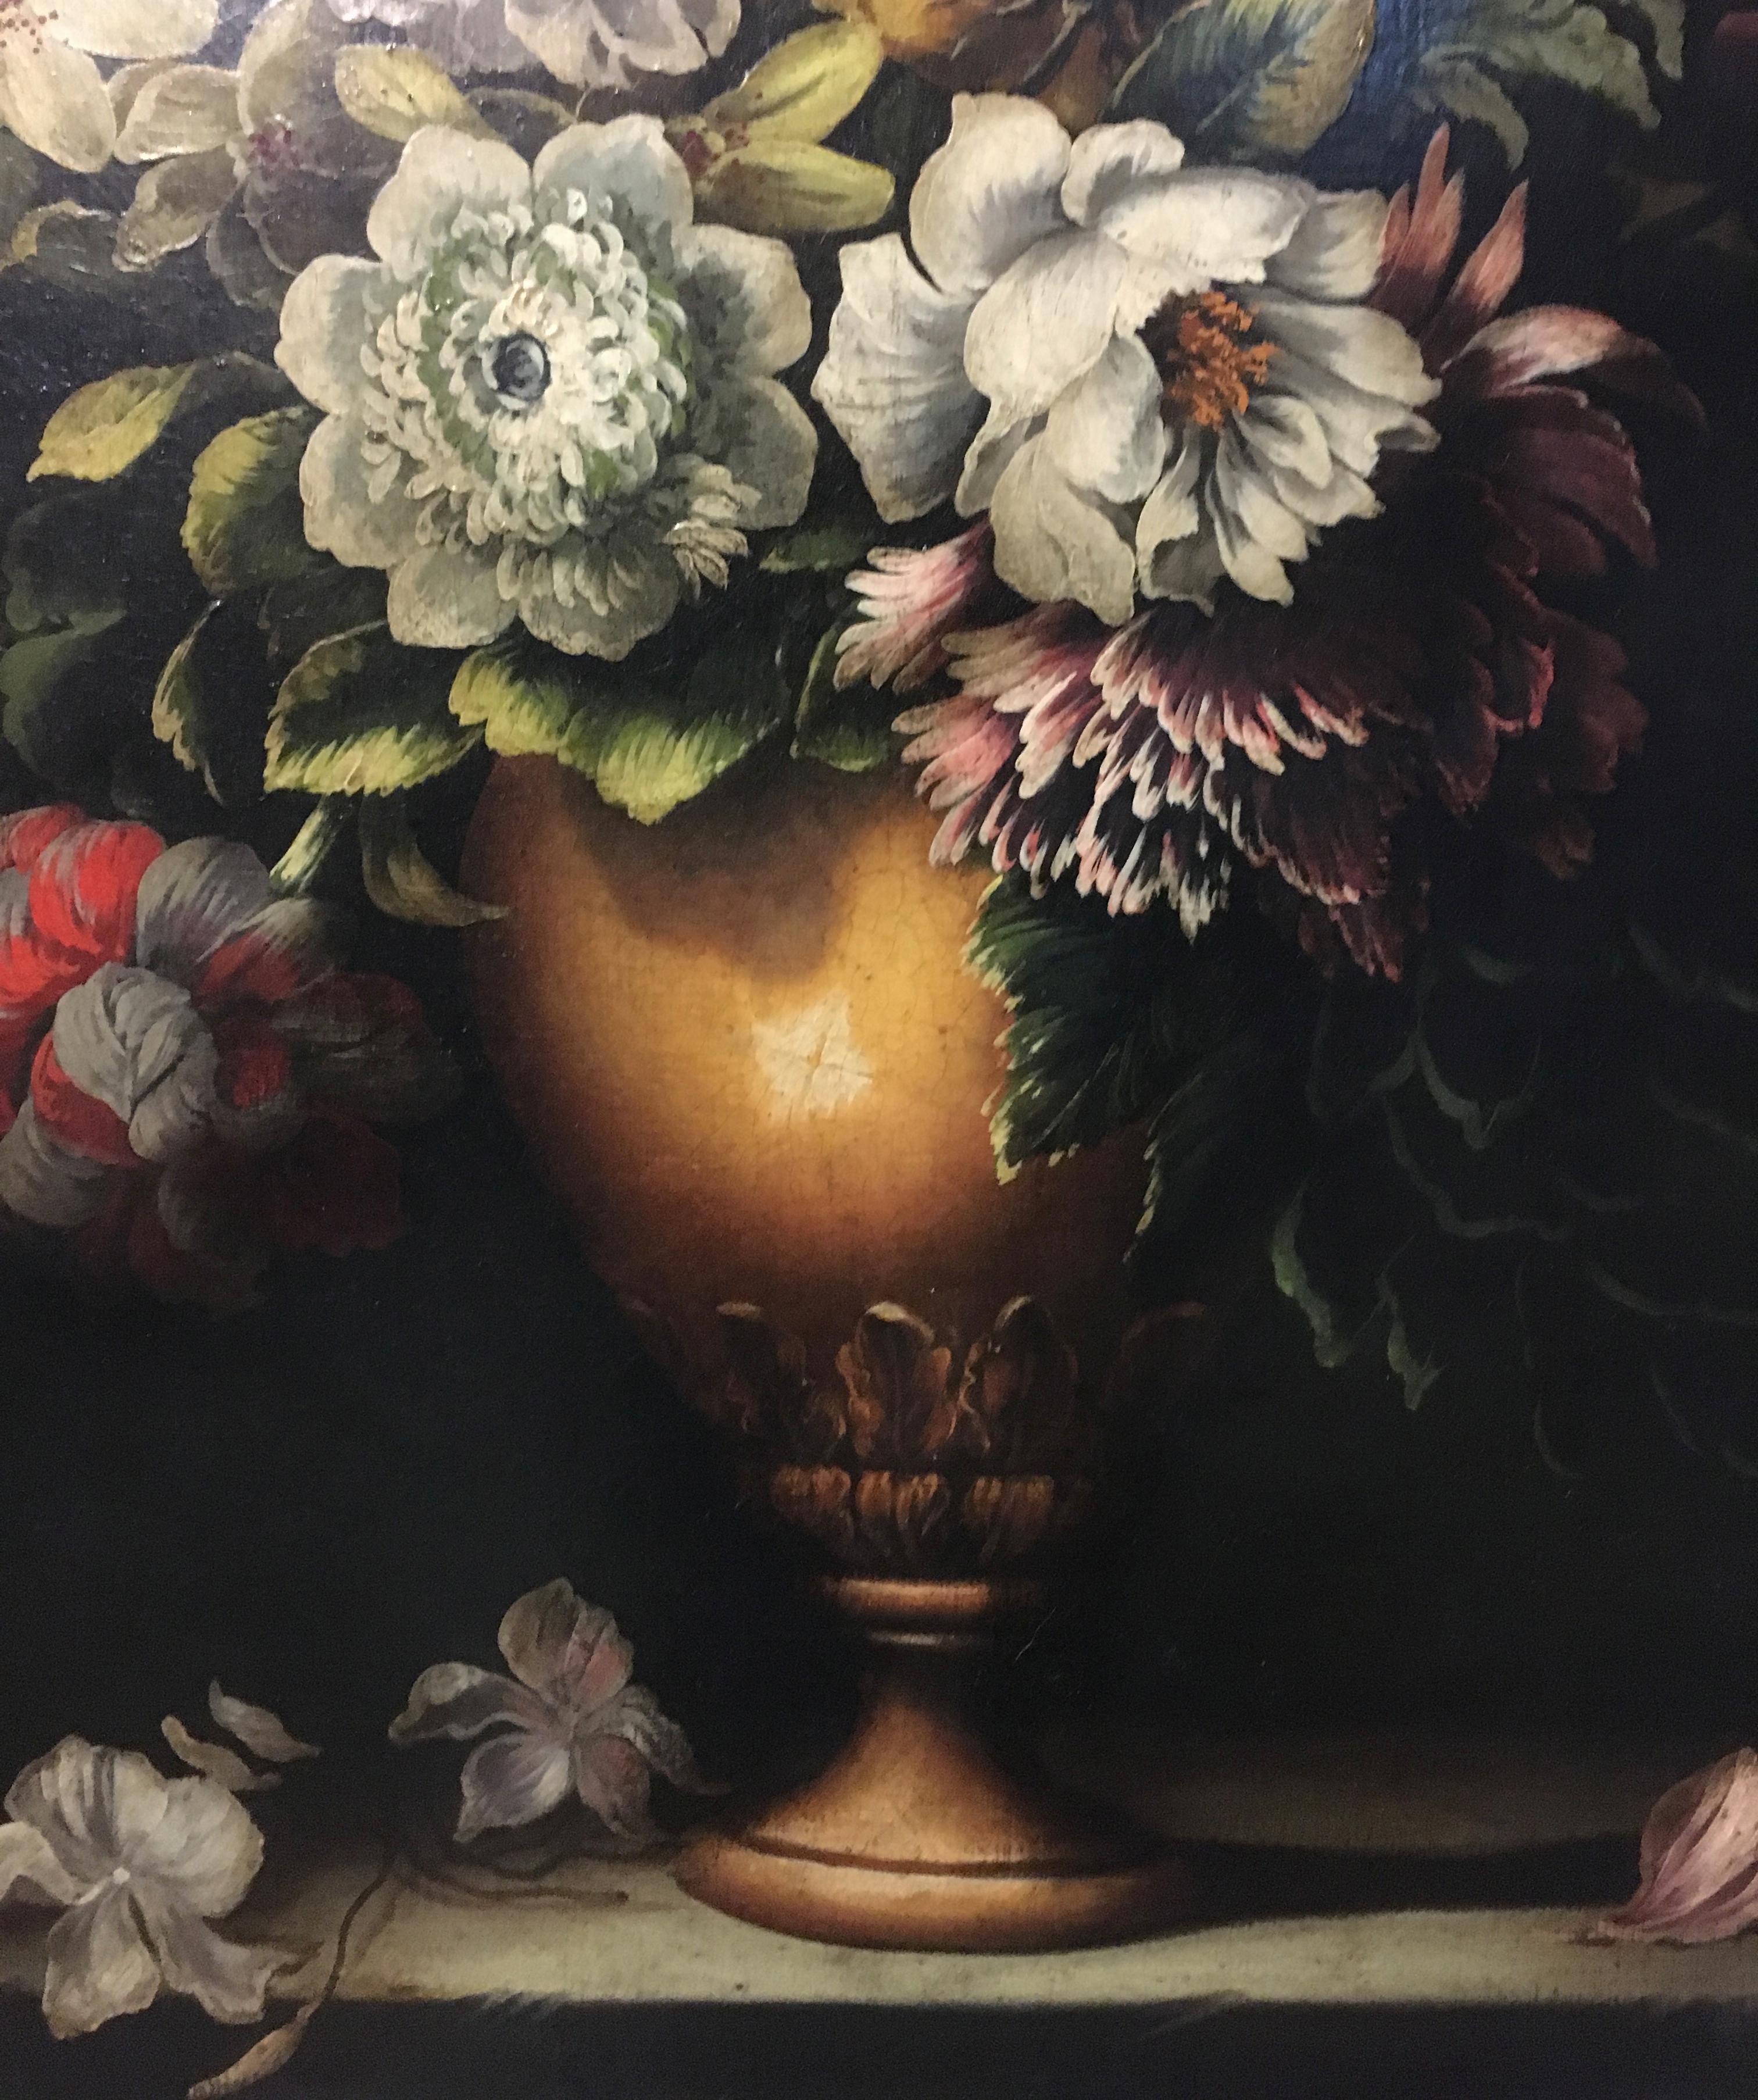 Flowers - Carlo De Tommasi Italia 2008 - Oil on canvas cm. 90x60
In this painting Carlo De Tommasi is inspired by the eighteenth-century works of Abrham Bosschaert Dutch painter, known above all as a painter of flowers, mainly in vases, sometimes in